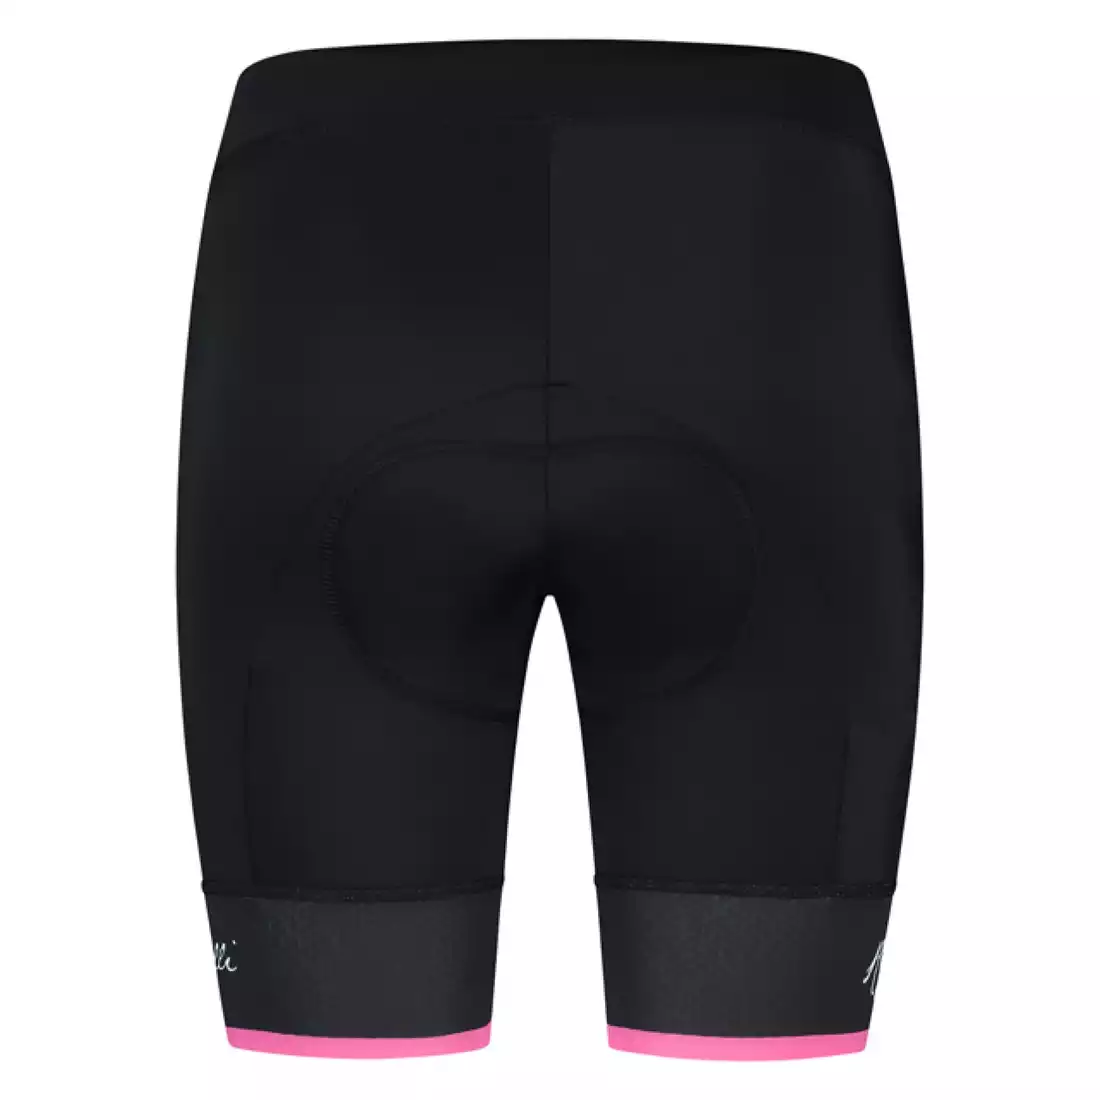 ROGELLI SELECT II Women's cycling shorts, black and pink